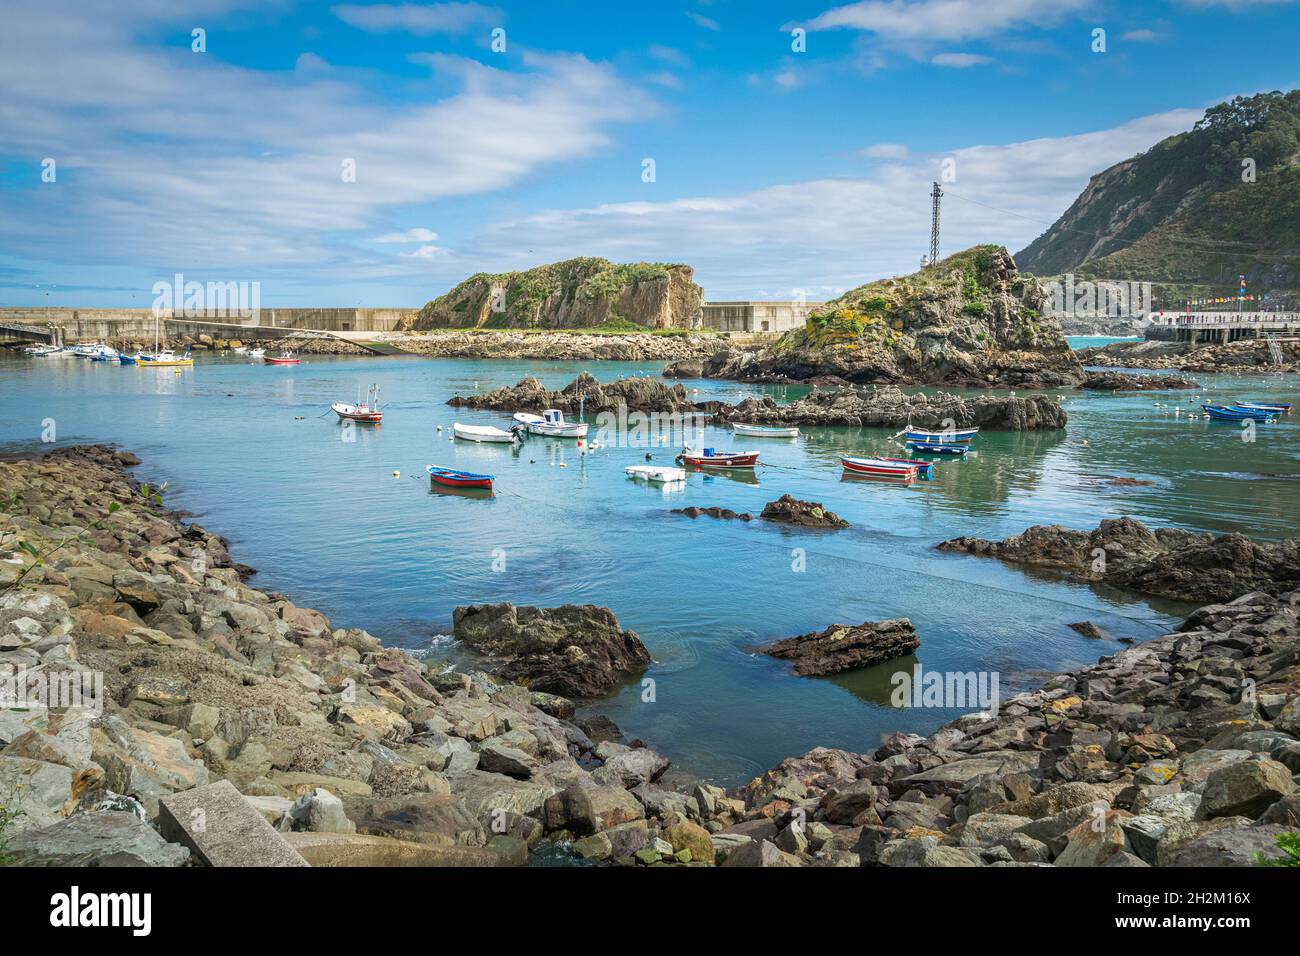 Picturesque fishing port in the small village of Cudillero, Asturias, Spain. Stock Photo